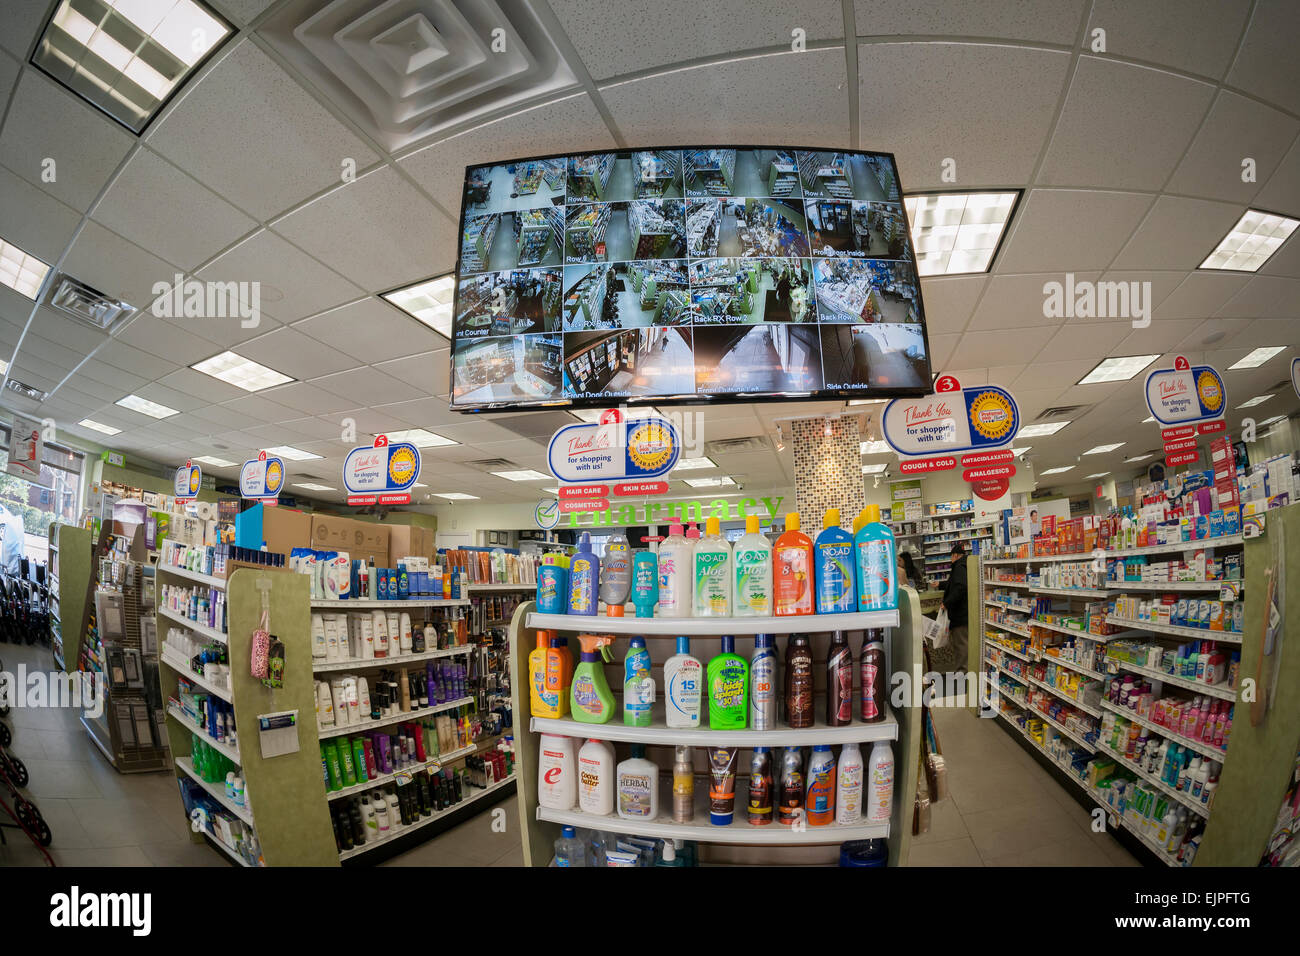 A monitor shows the video feeds of security cameras of a drug store in New  York on Monday, March 23, 2015. (© Richard B. Levine Stock Photo - Alamy